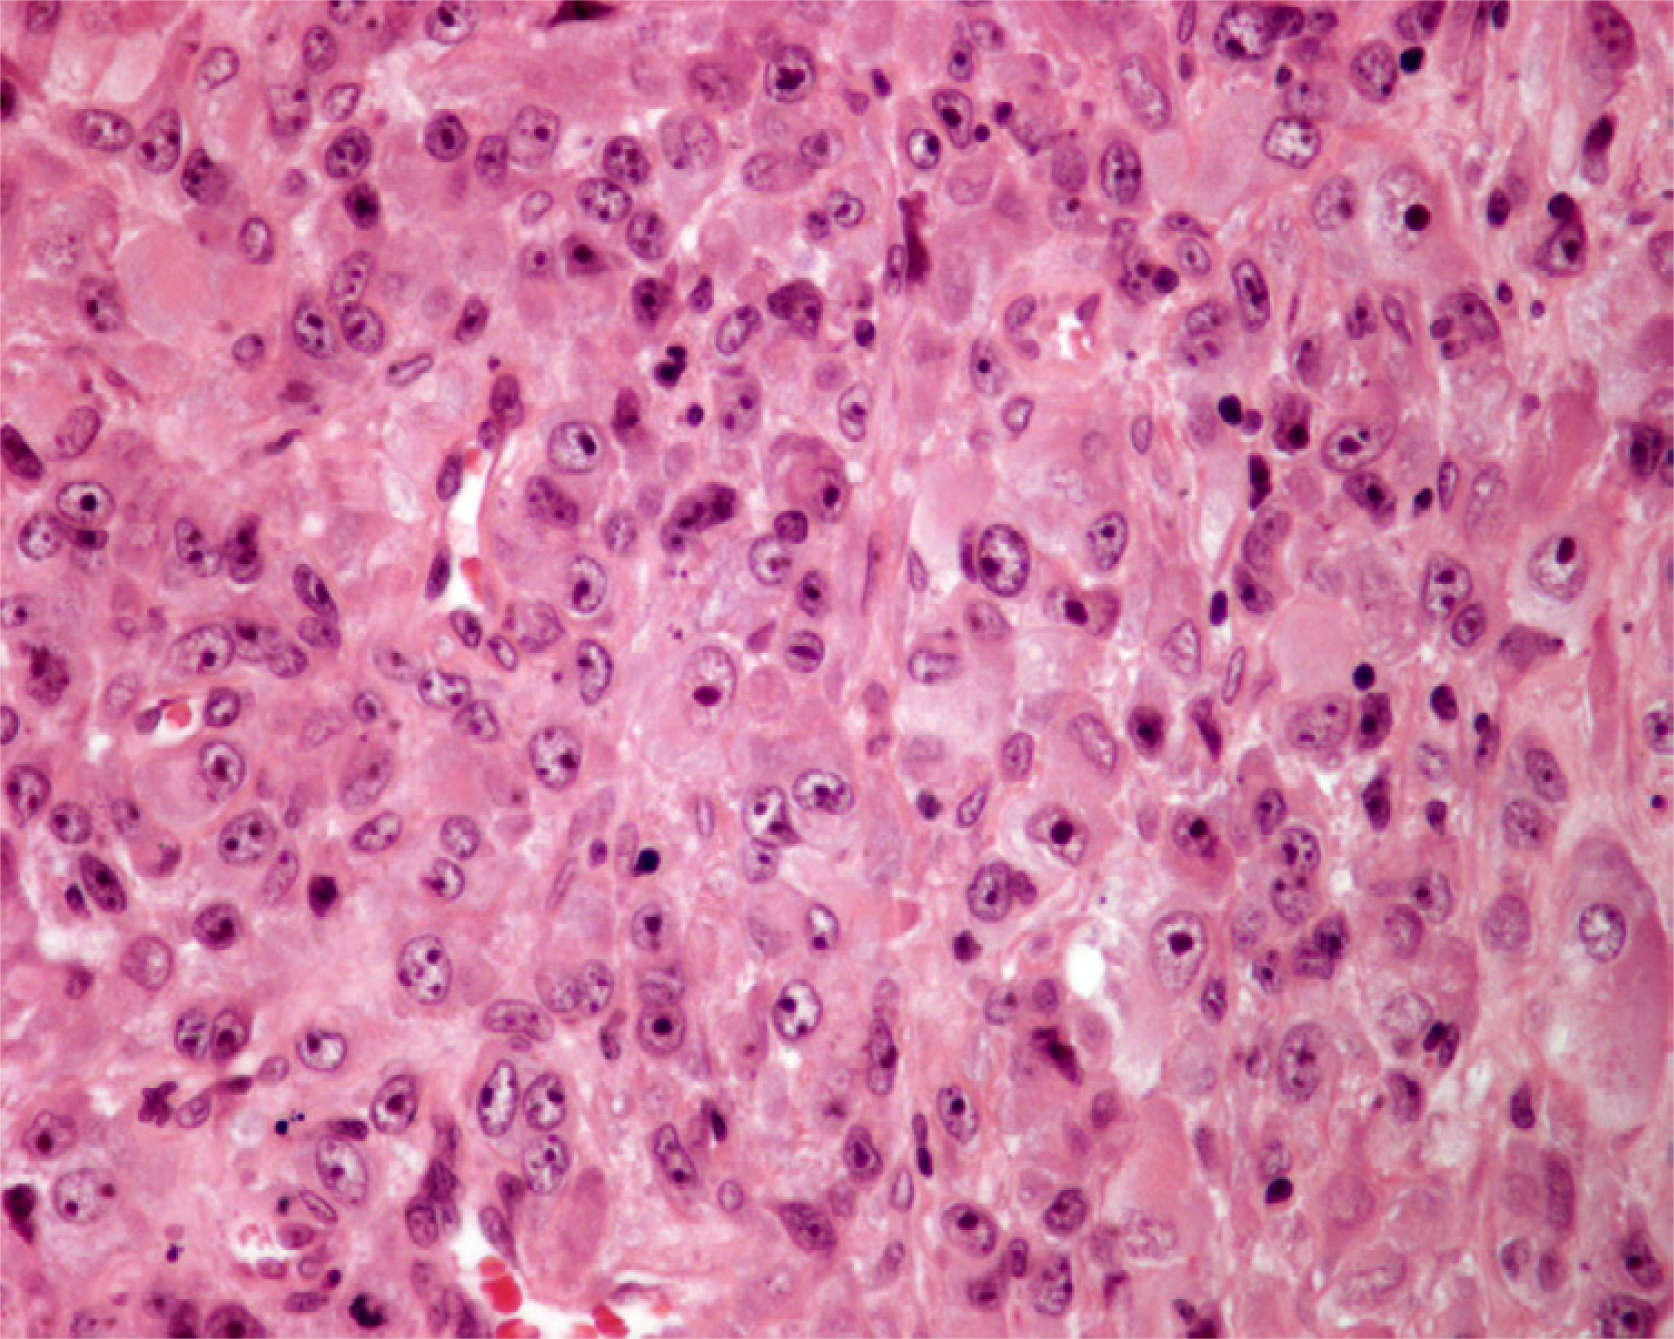 Histology of metastatic amelanotic melanoma to the thyroid in patient 4 shows large malignant polygonal cells with oval nuclei and prominent nucleoli, in solid pattern (hematoxylin and eosin, × 250).